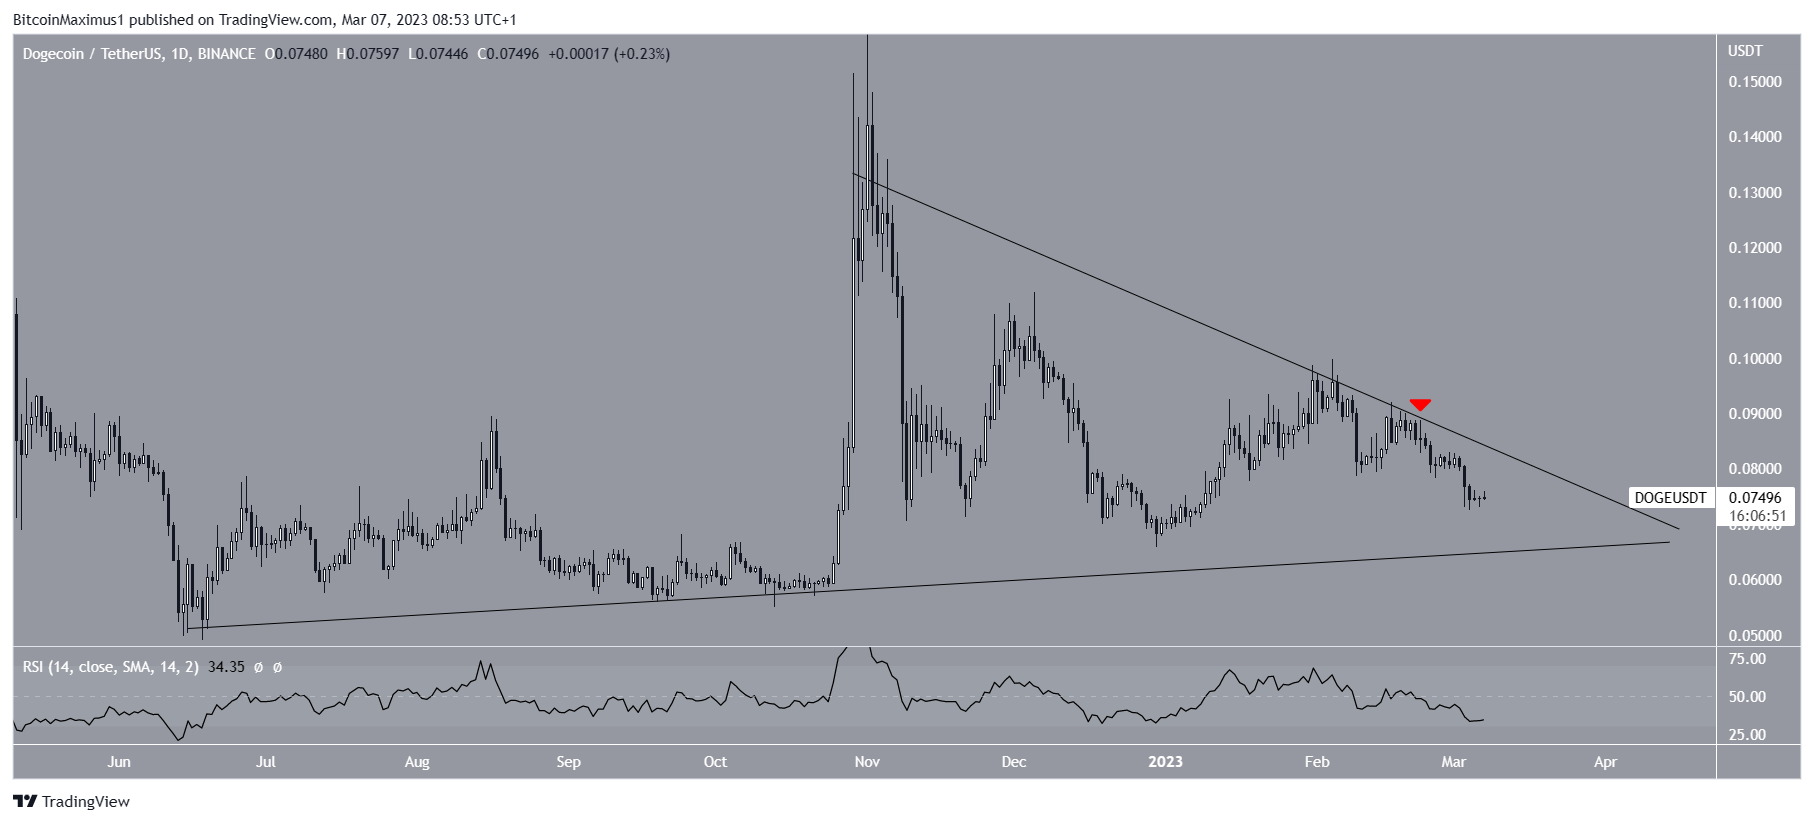 Dogecoin (DOGE) price Triangle Movement